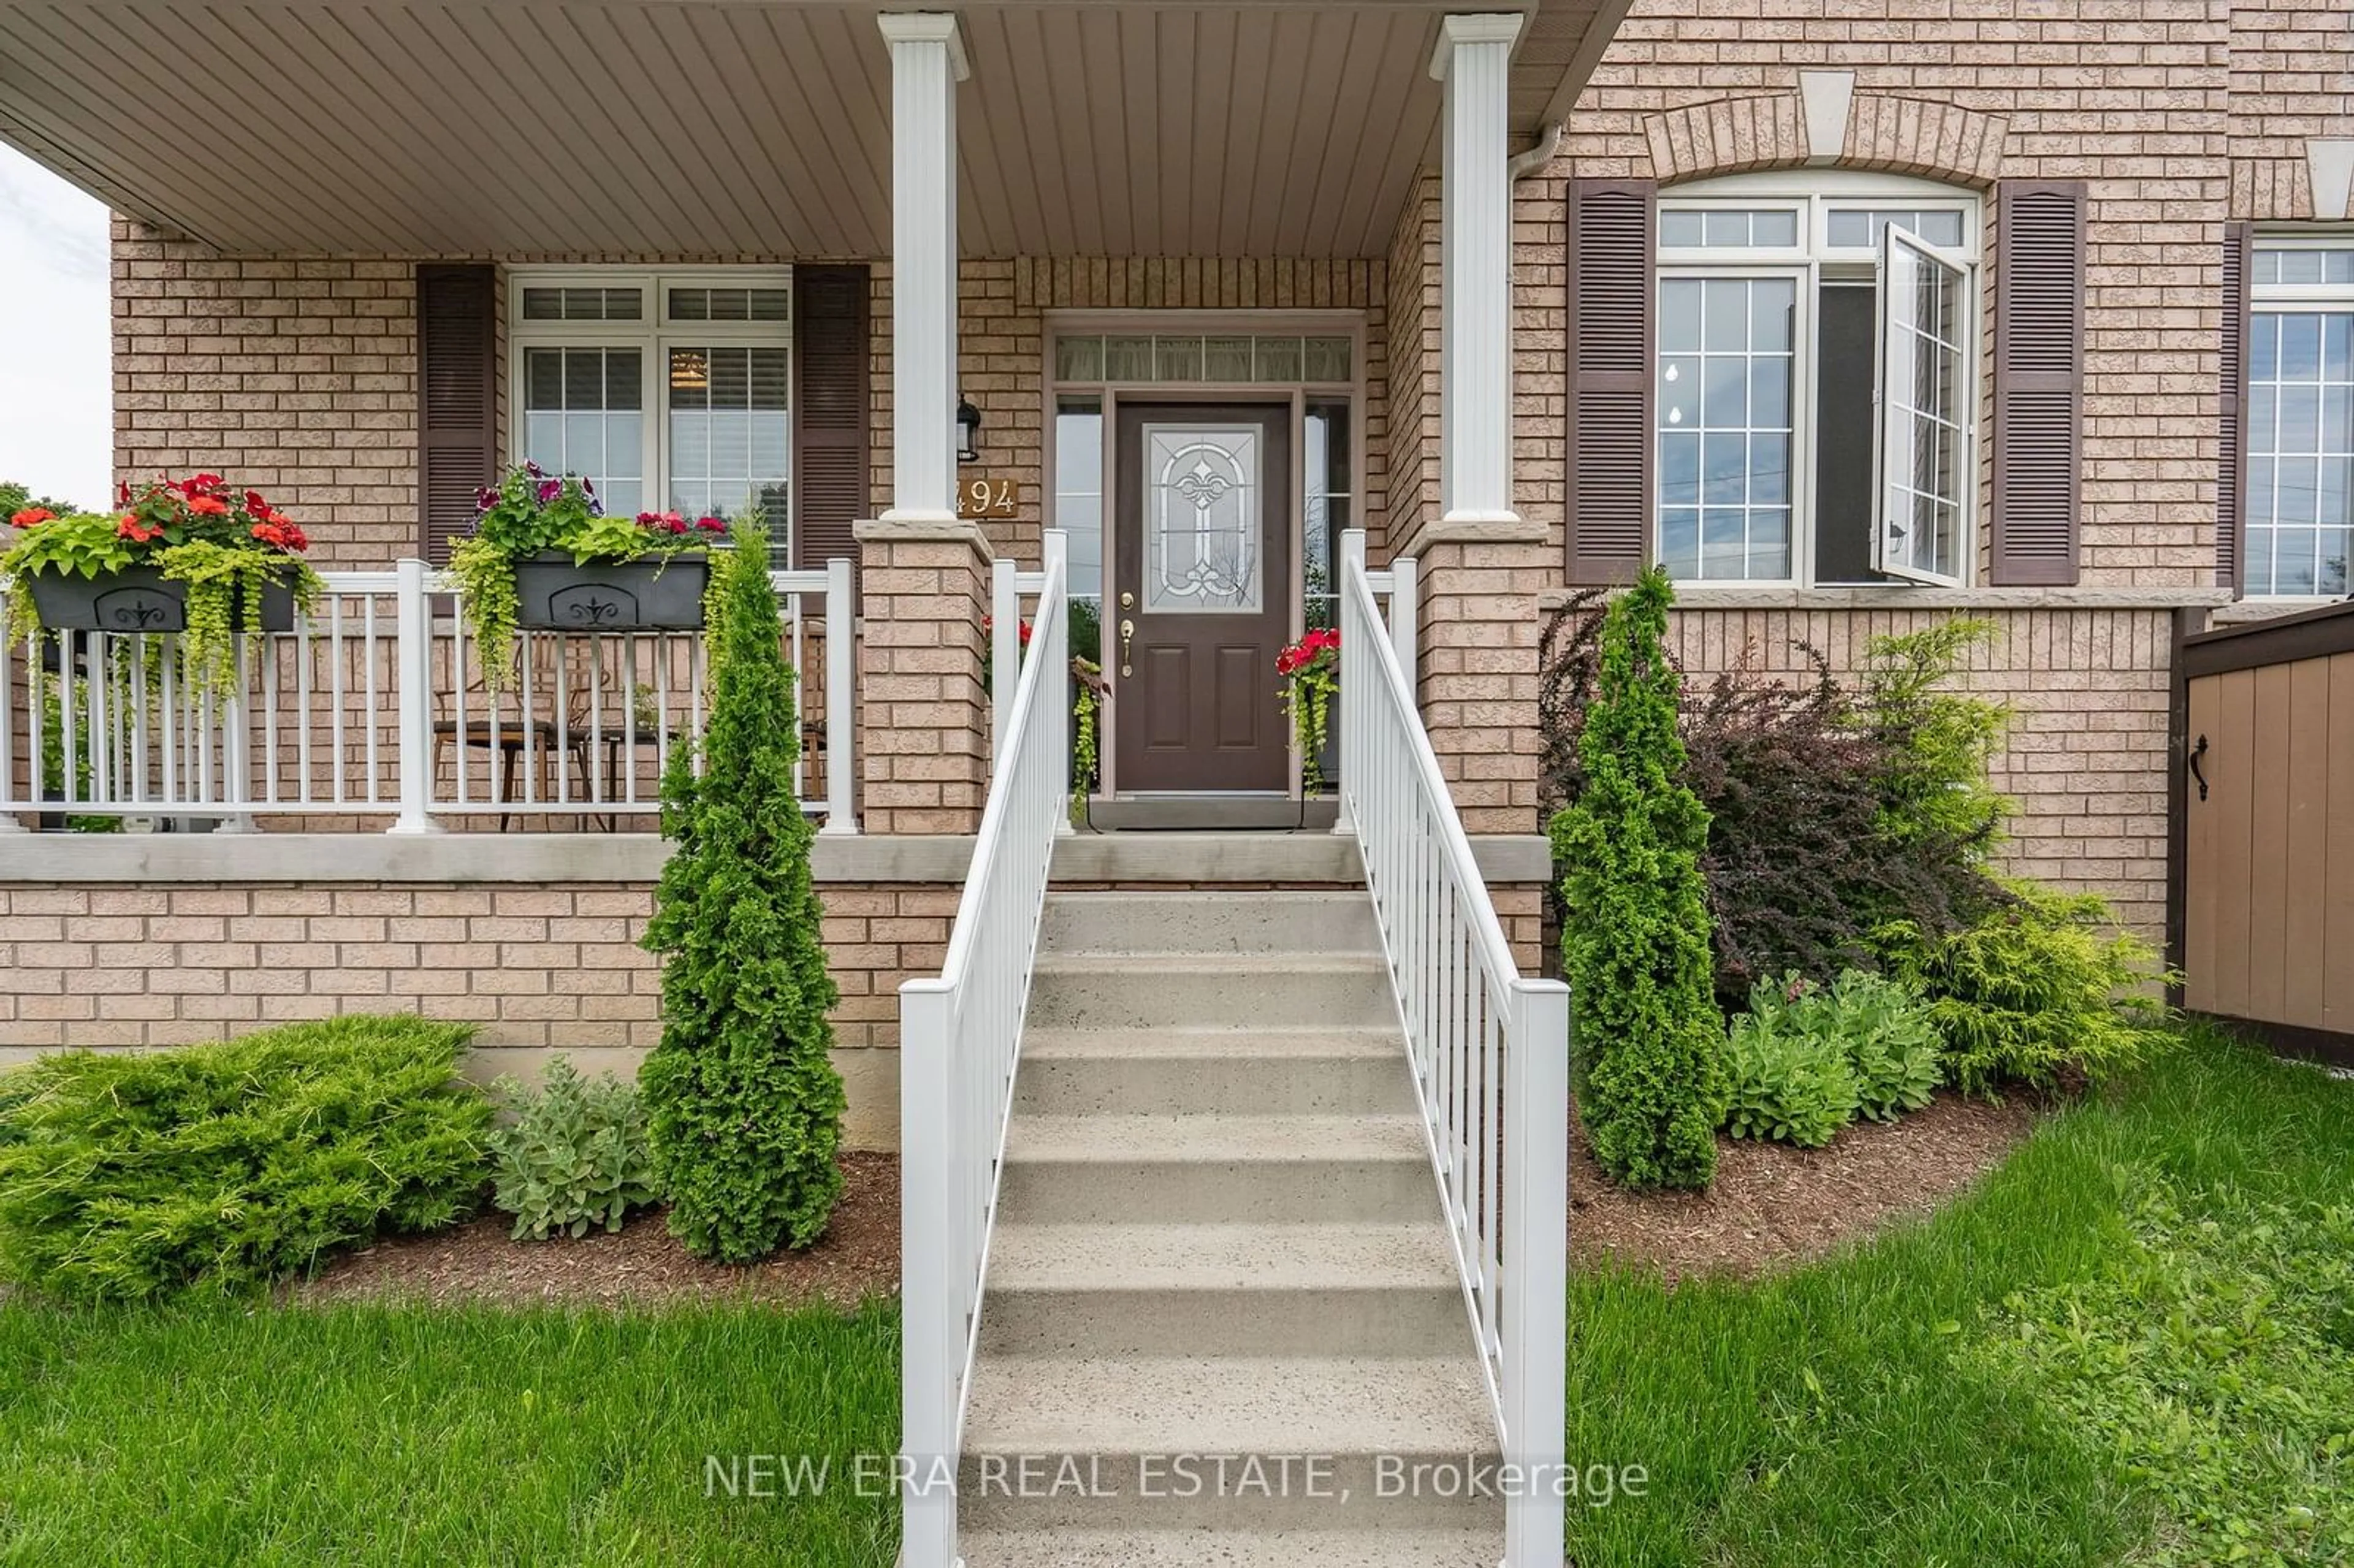 Home with brick exterior material for 2494 Earl Gray Ave, Pickering Ontario L1X 0B9